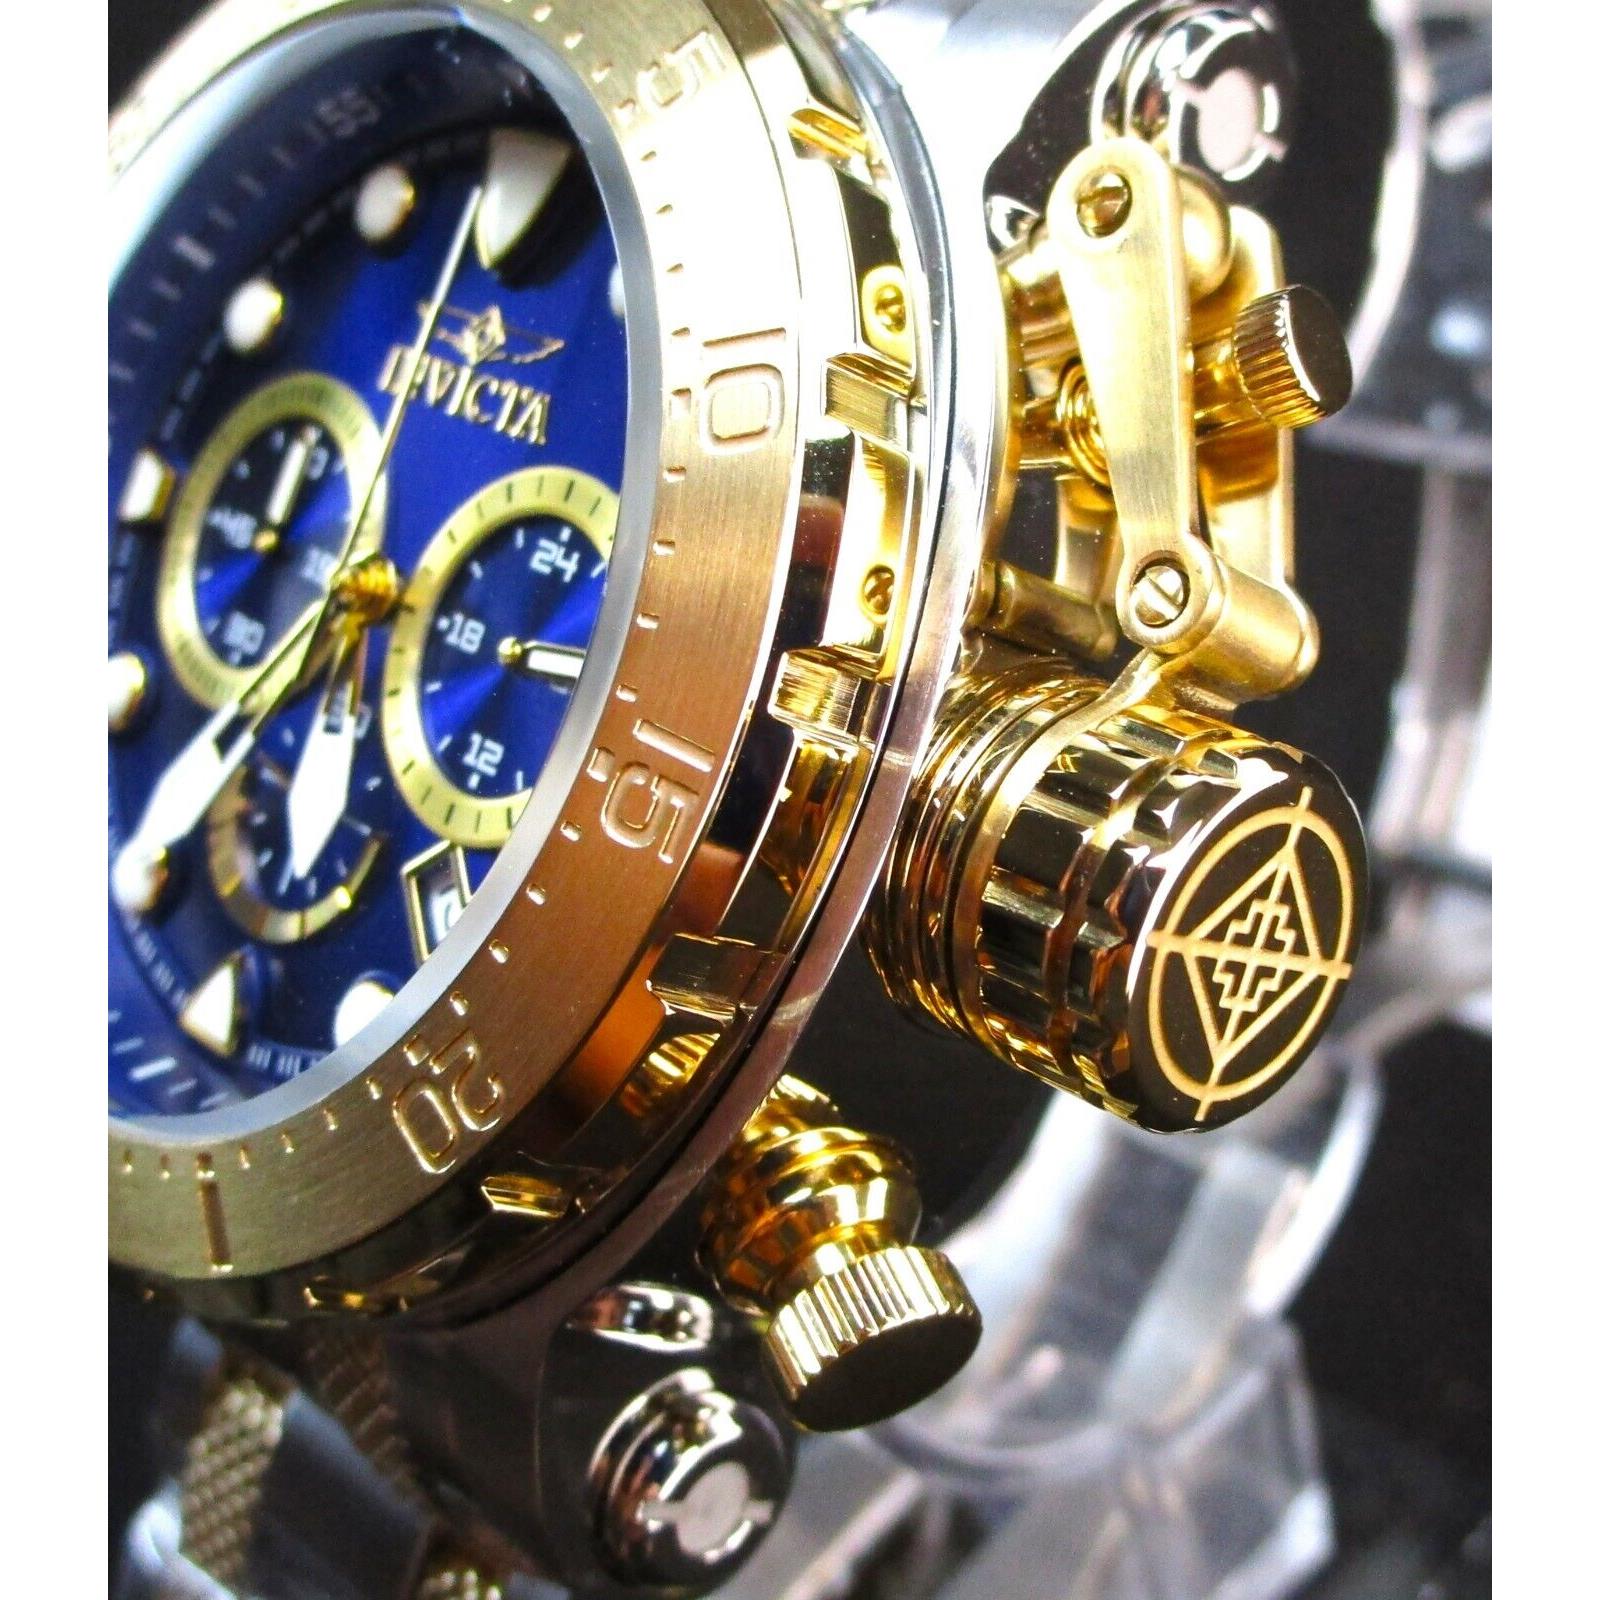 Invicta watch Coalition Forces - Blue Dial, Stainless Steel w/Gold Band, Gold Bezel